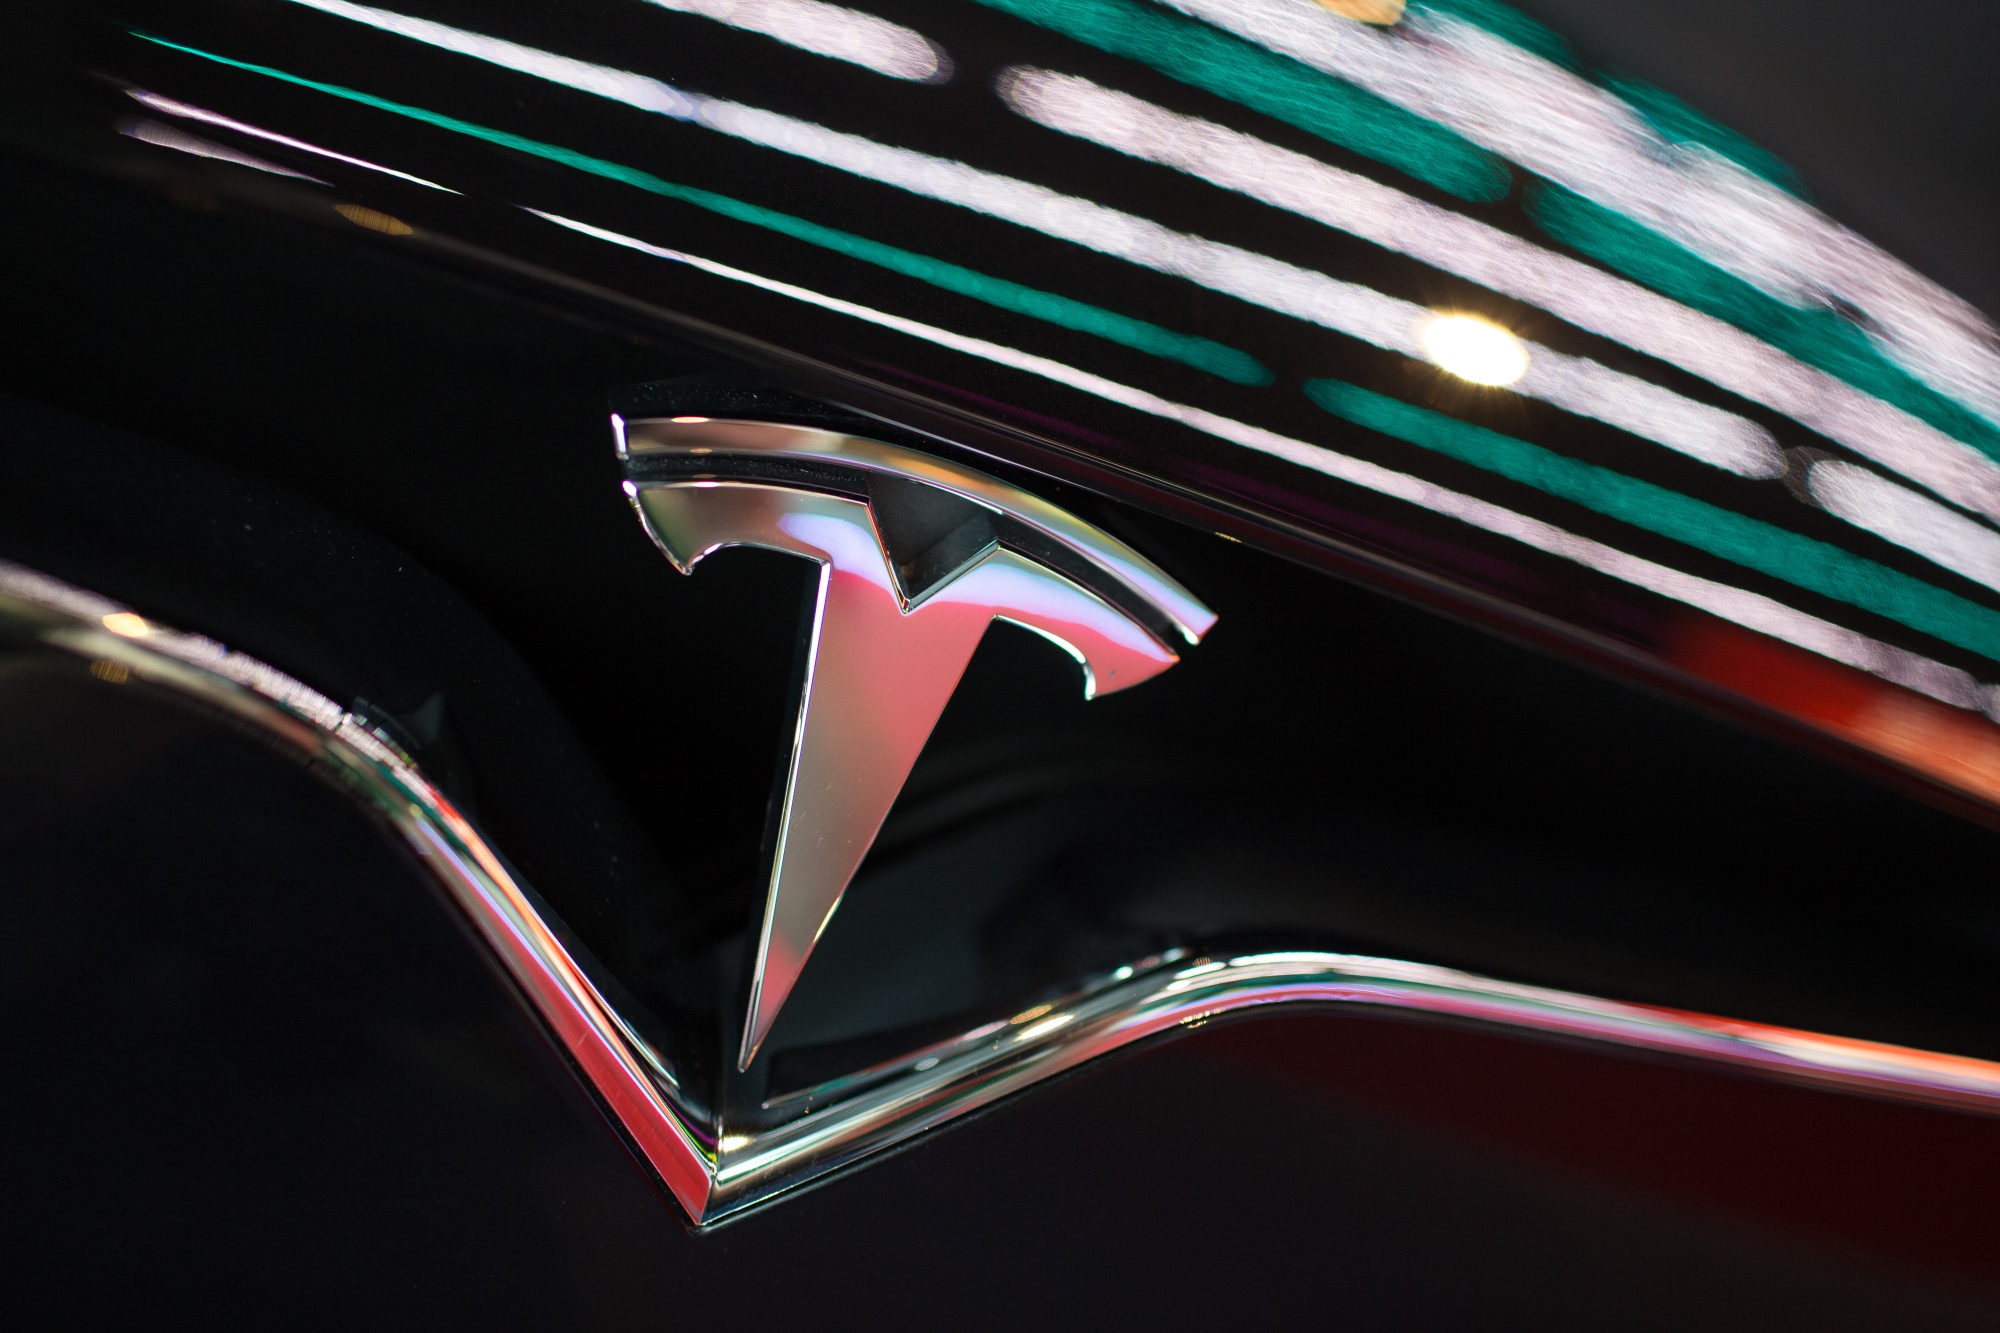 The Tesla Inc. logo is seen on the grille of a Model X electric vehicle.